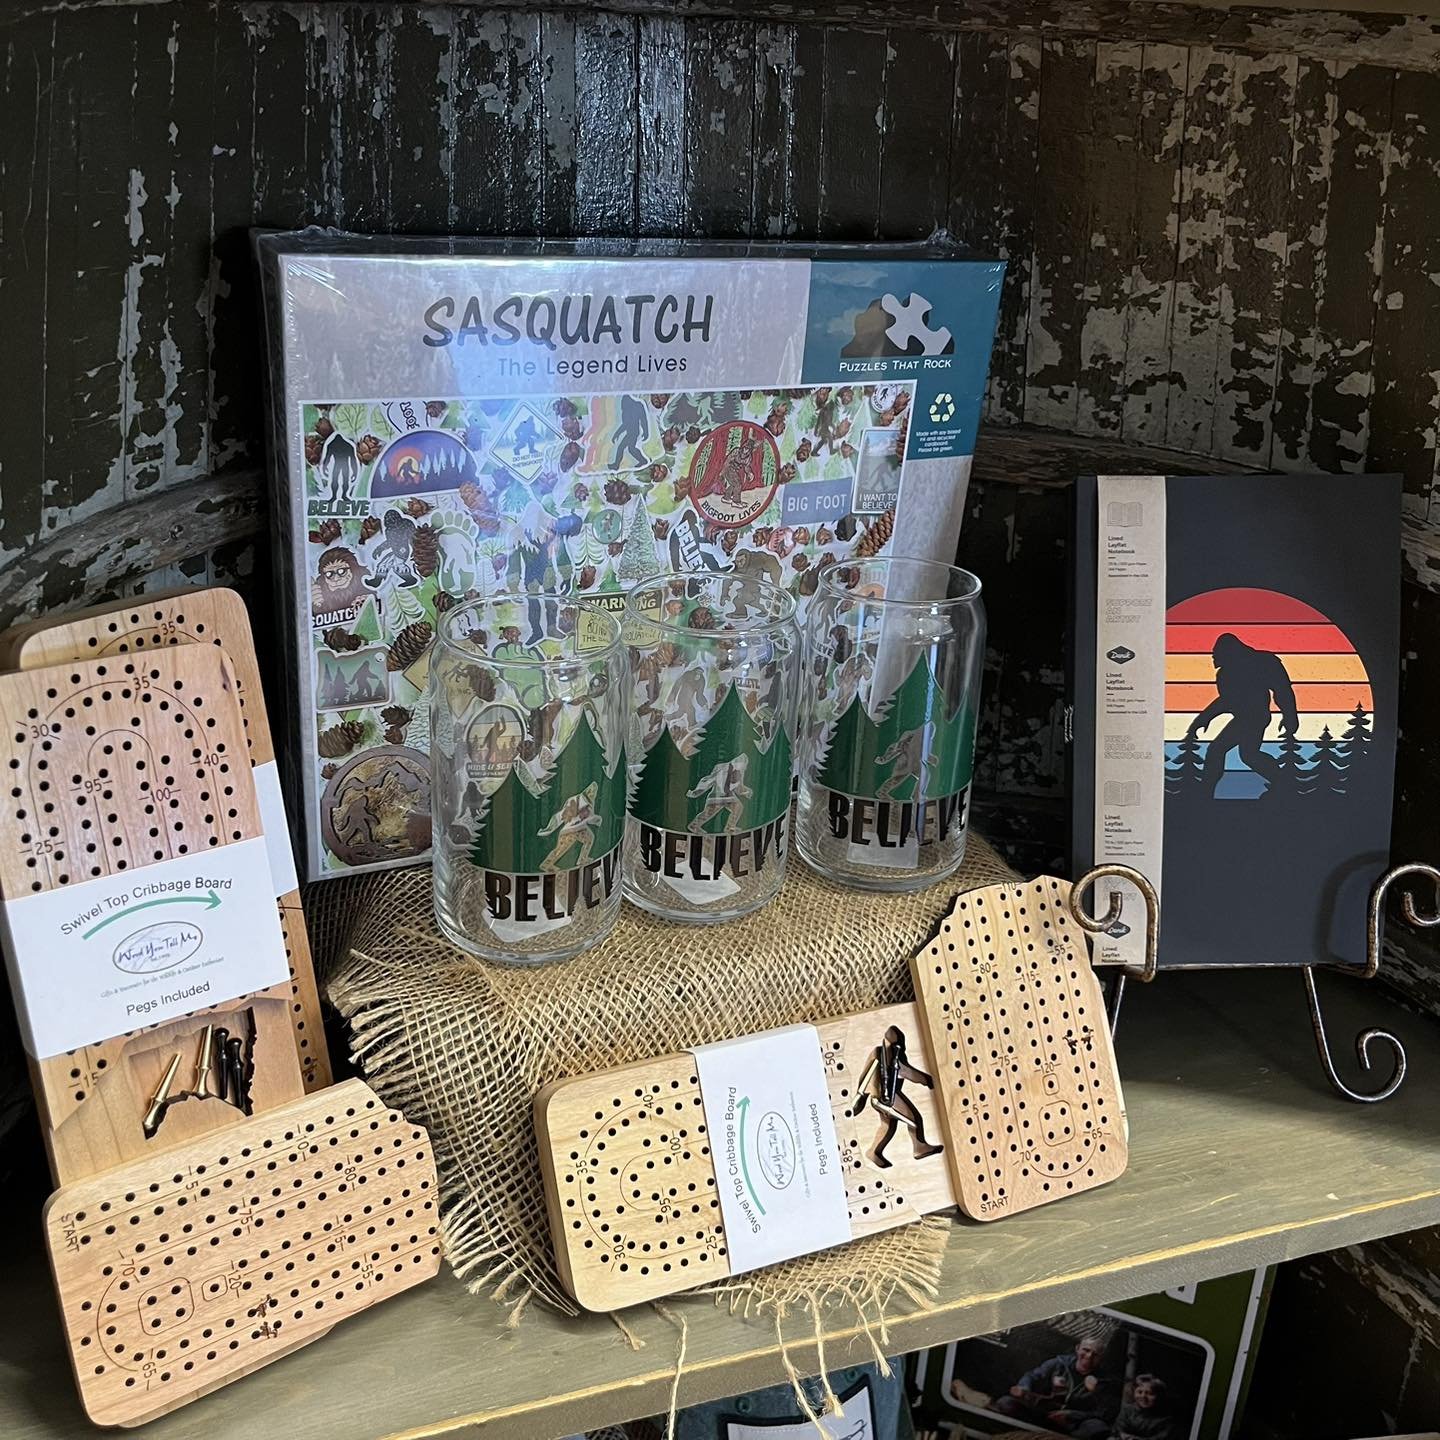 The Legend Lives Sasquatch themed items in stock. 🌲 🕵️&zwj;♂️ 👀 🔍 
.
.
.
.
#mnsmallbiz #mnshopsmall #leader1918 #mnboutique #midweststyle #boutique #mnlocalbusiness #cambridgemn #mnlocal #mnretail #mnshop #myleaderstyle #boutiqueshopping #mnsmall